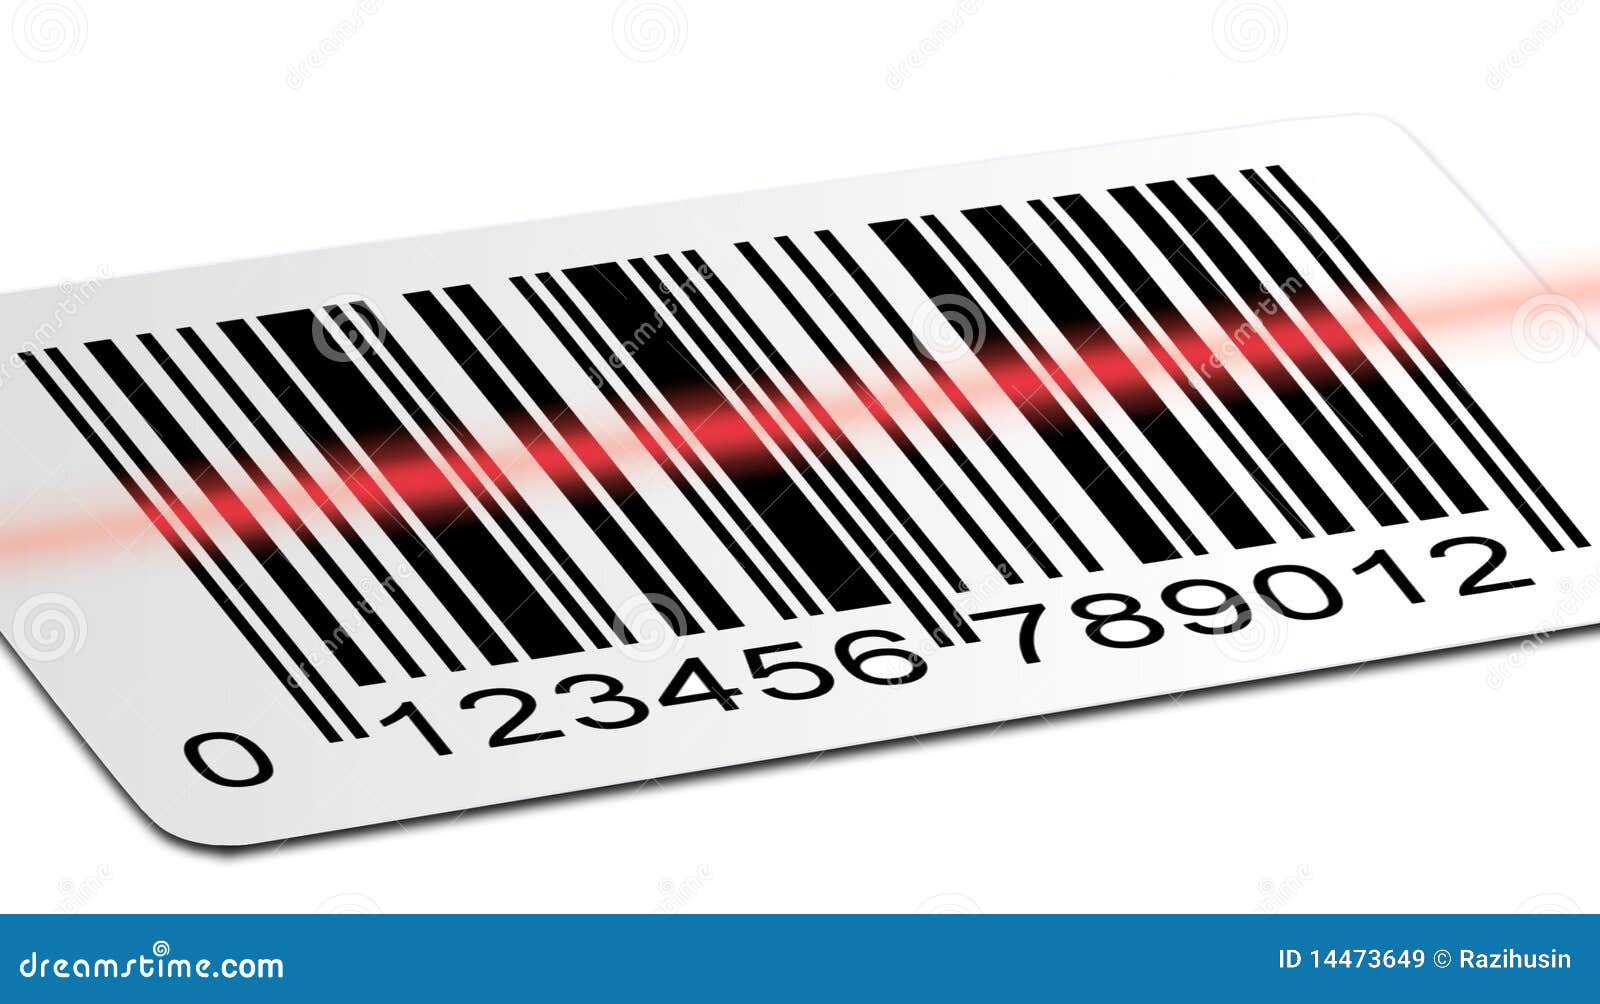 barcode scanner clipart - photo #36